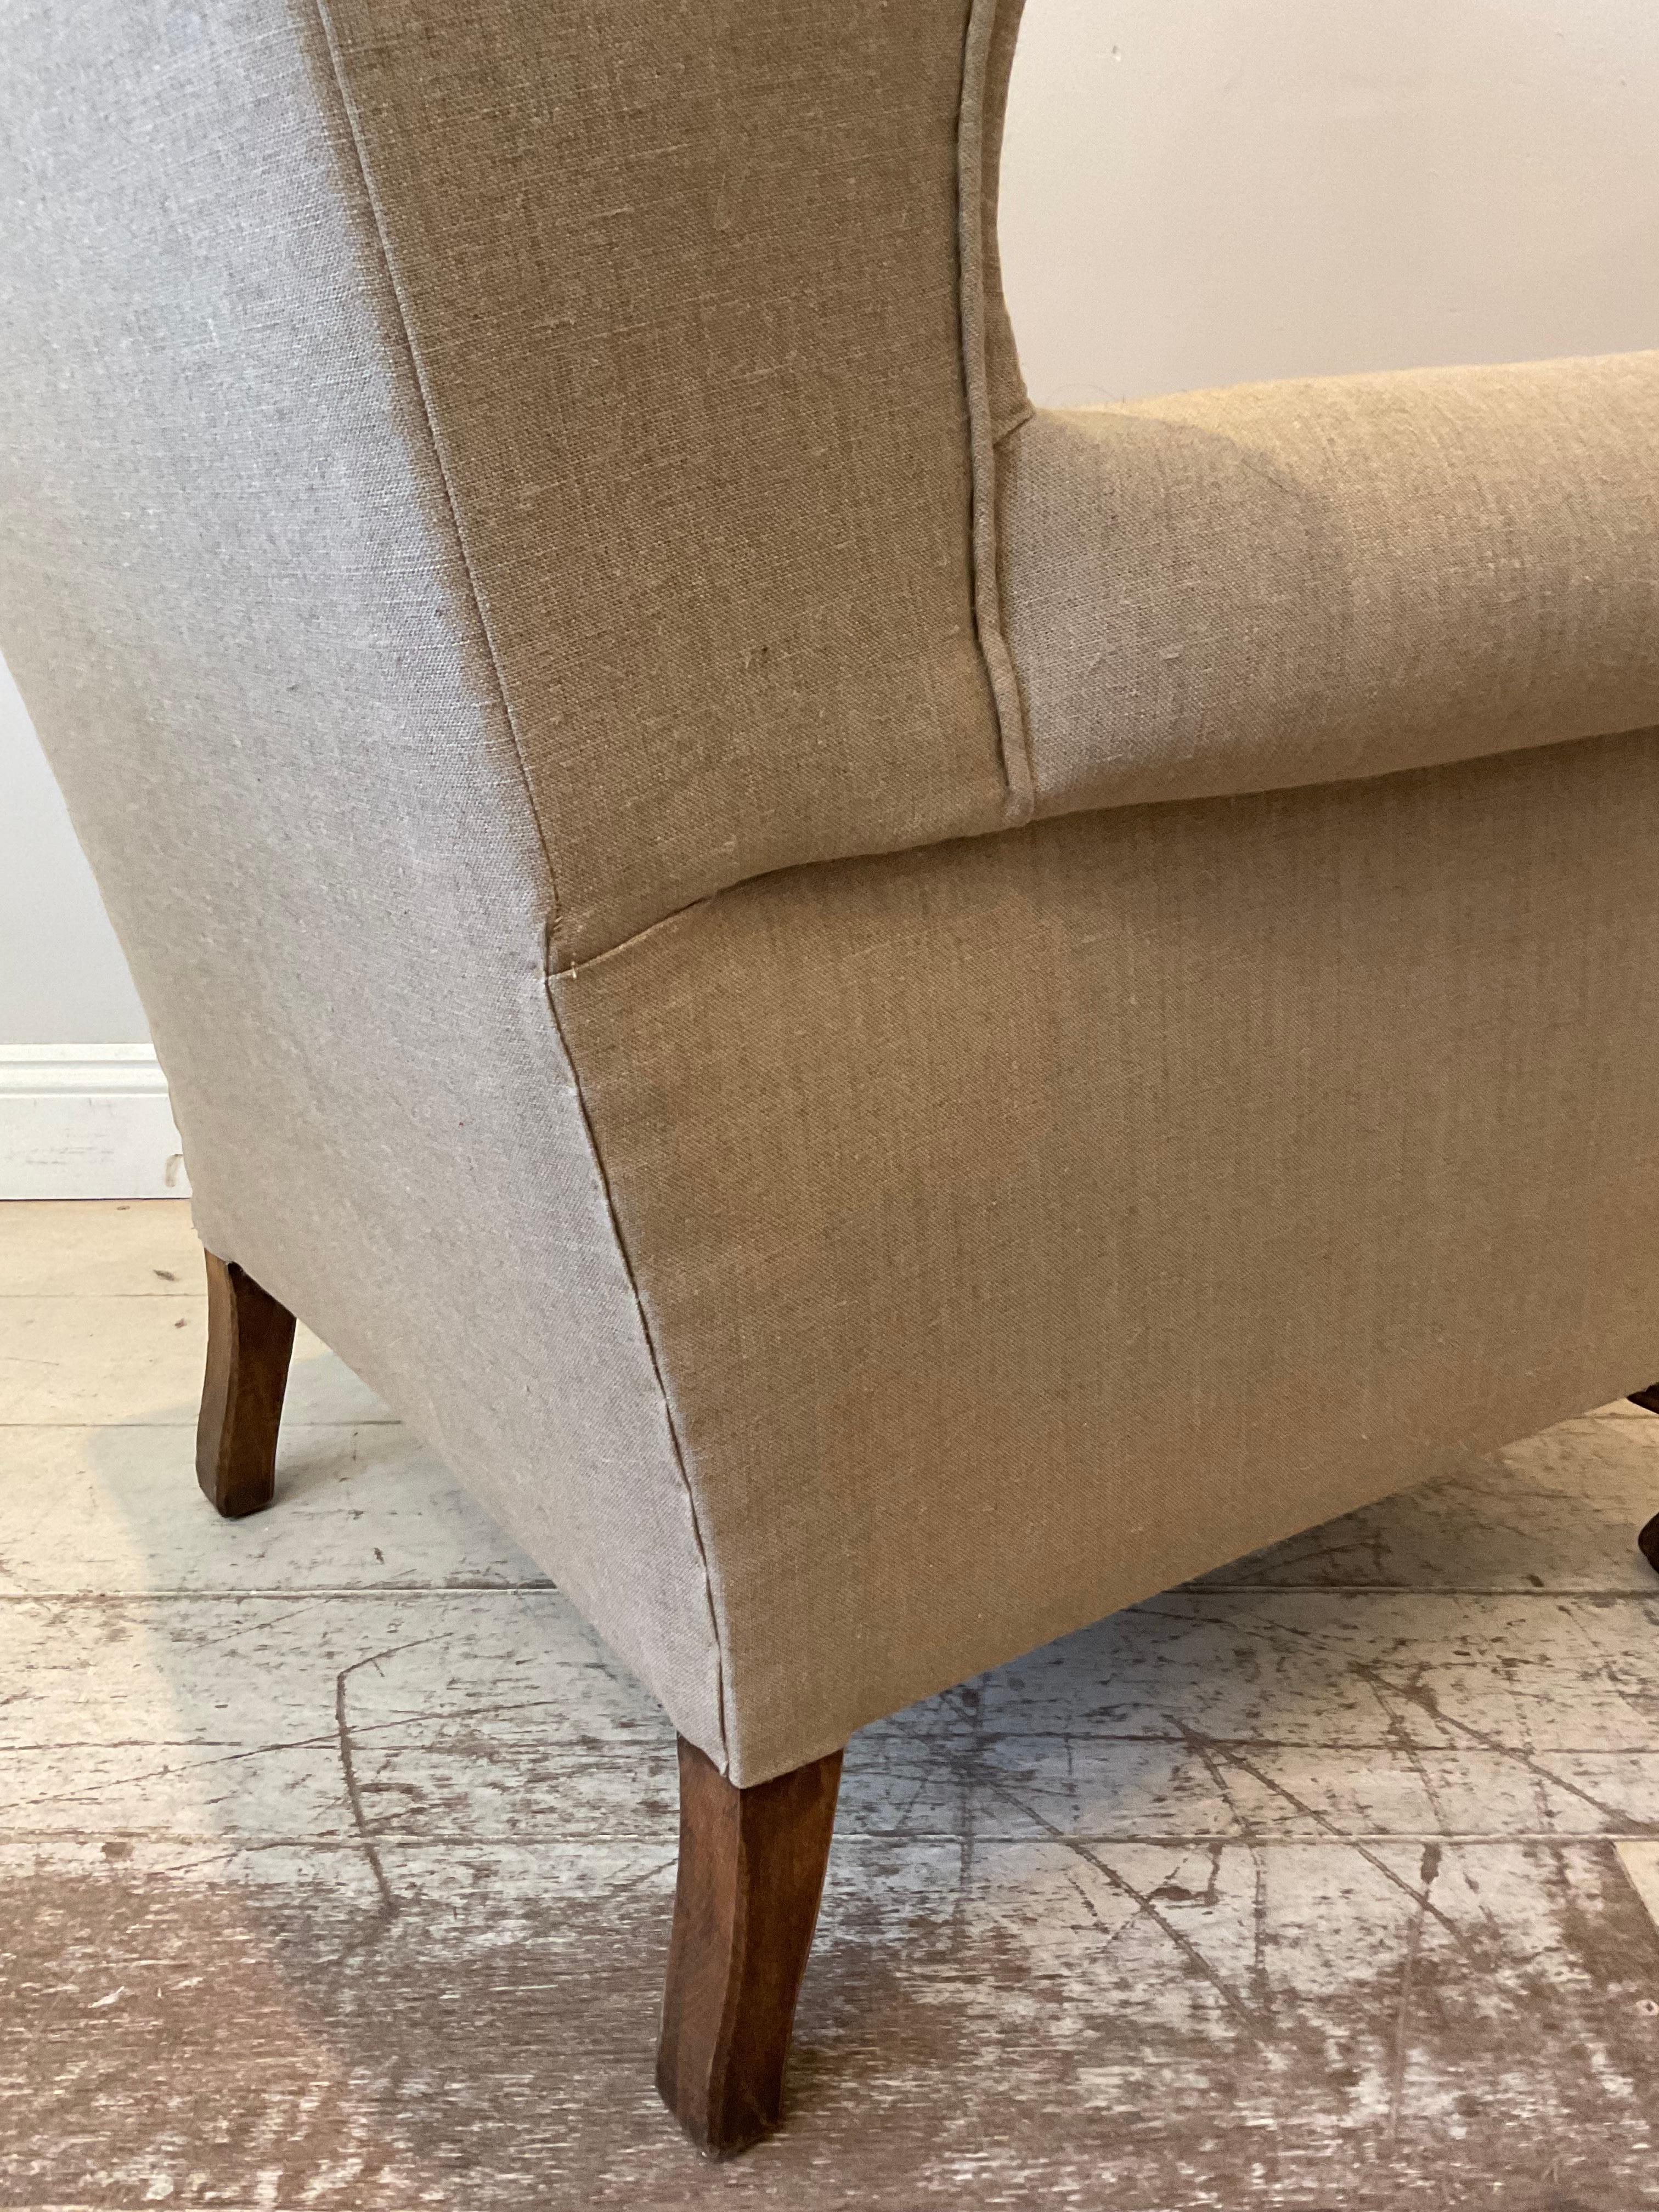 Pair of Large 1920s English Wing Back Chairs Upholstered in Neutral Linen 4